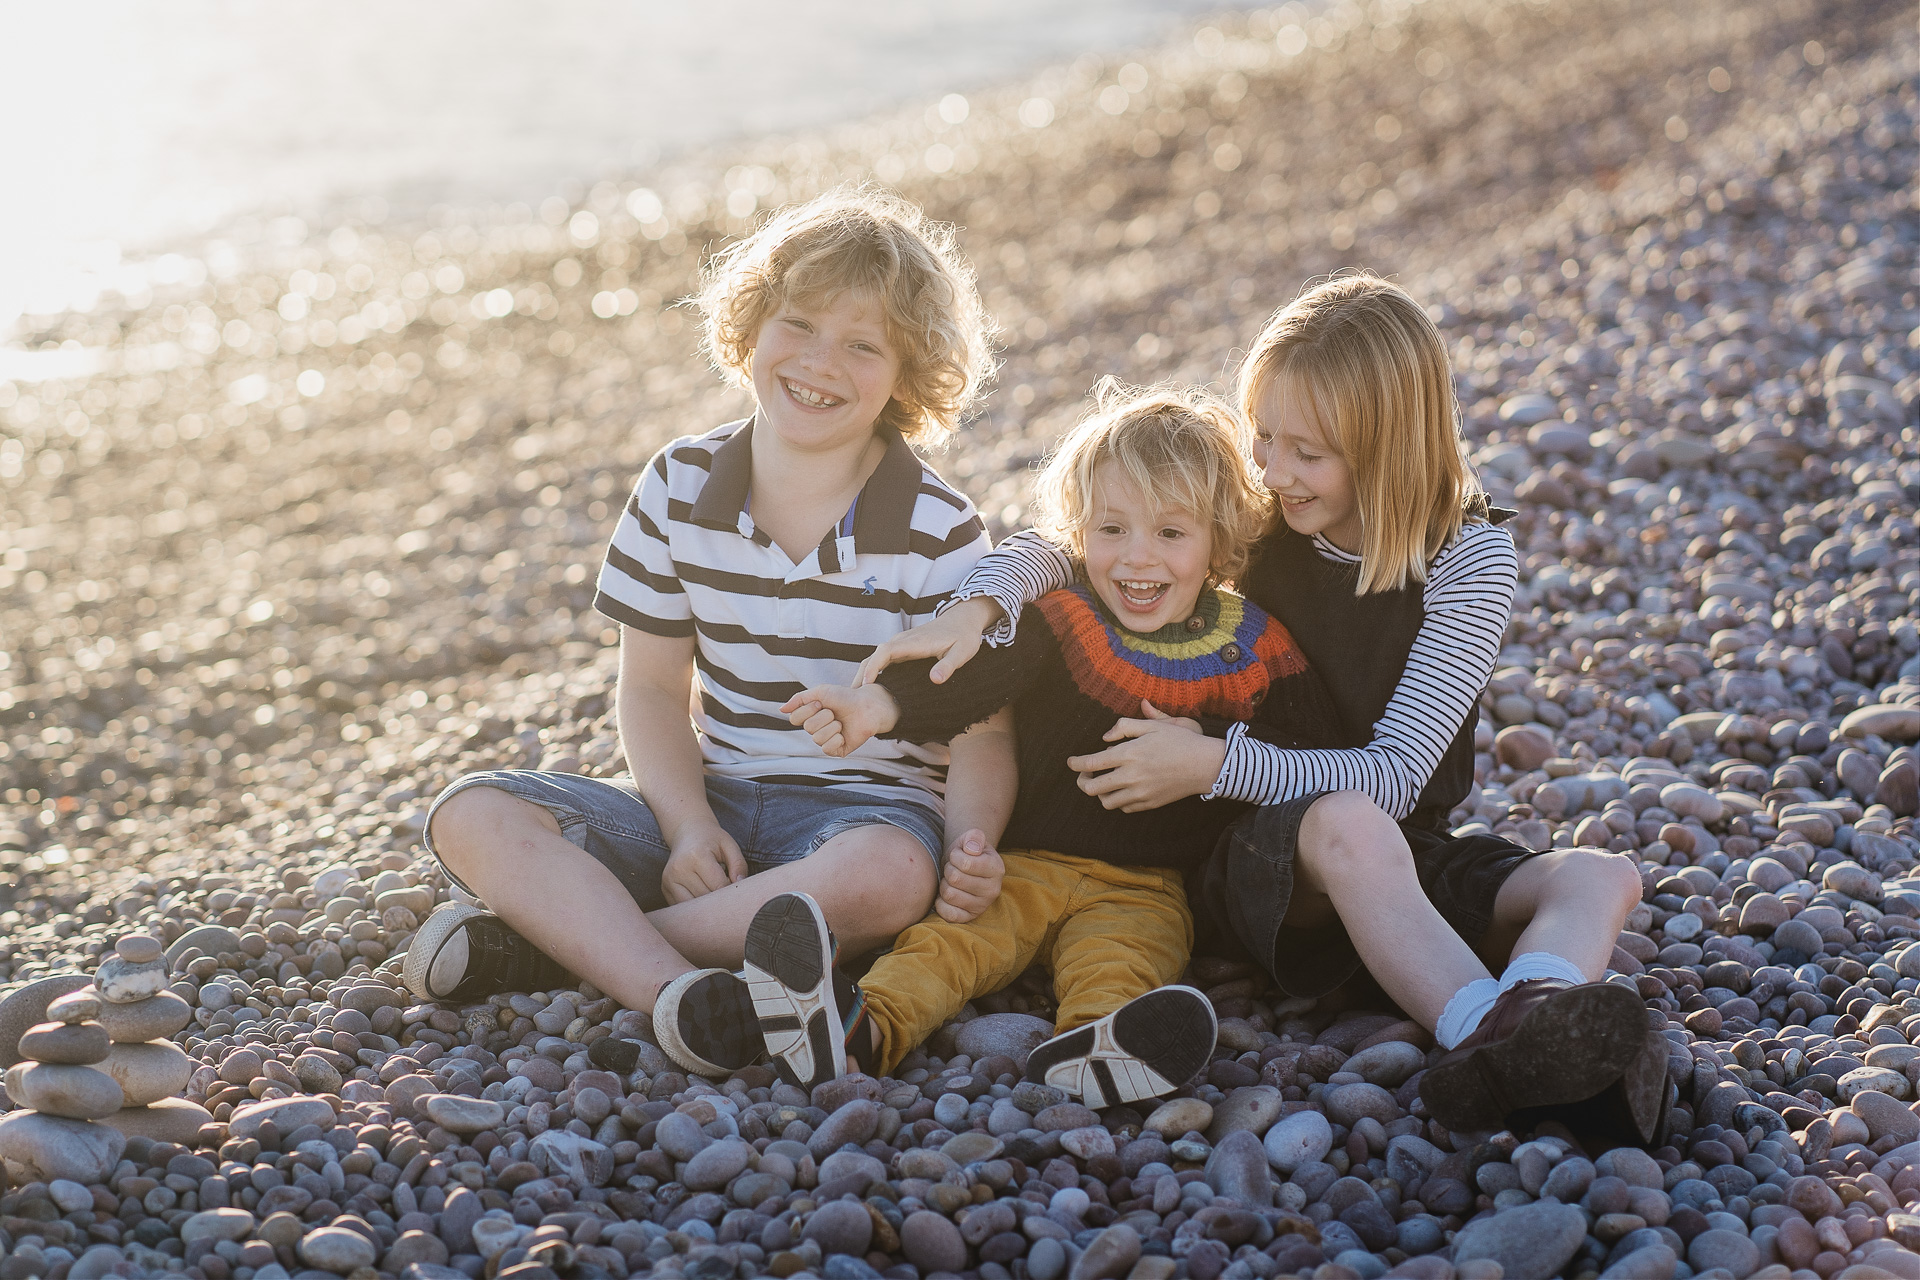 Three children laughing together on a pebble beach